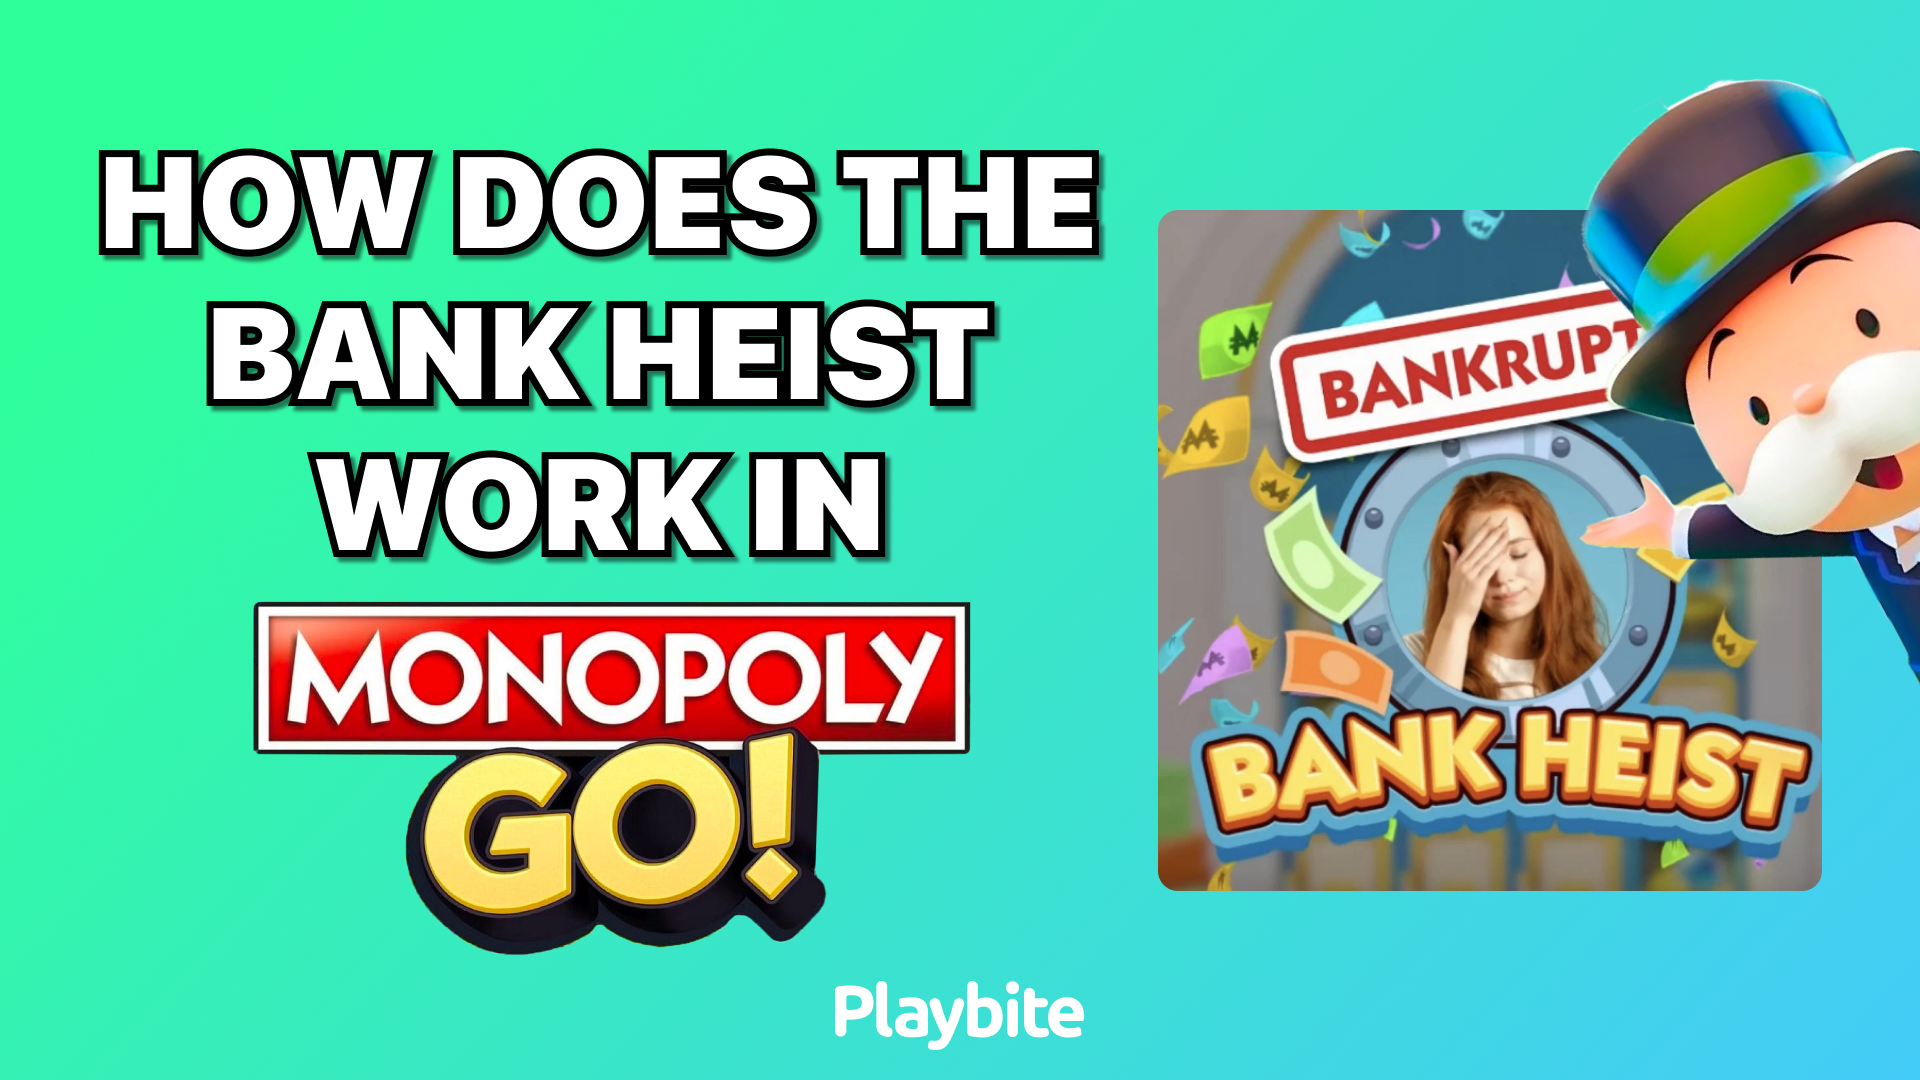 How Does the Bank Heist Work in Monopoly Go?